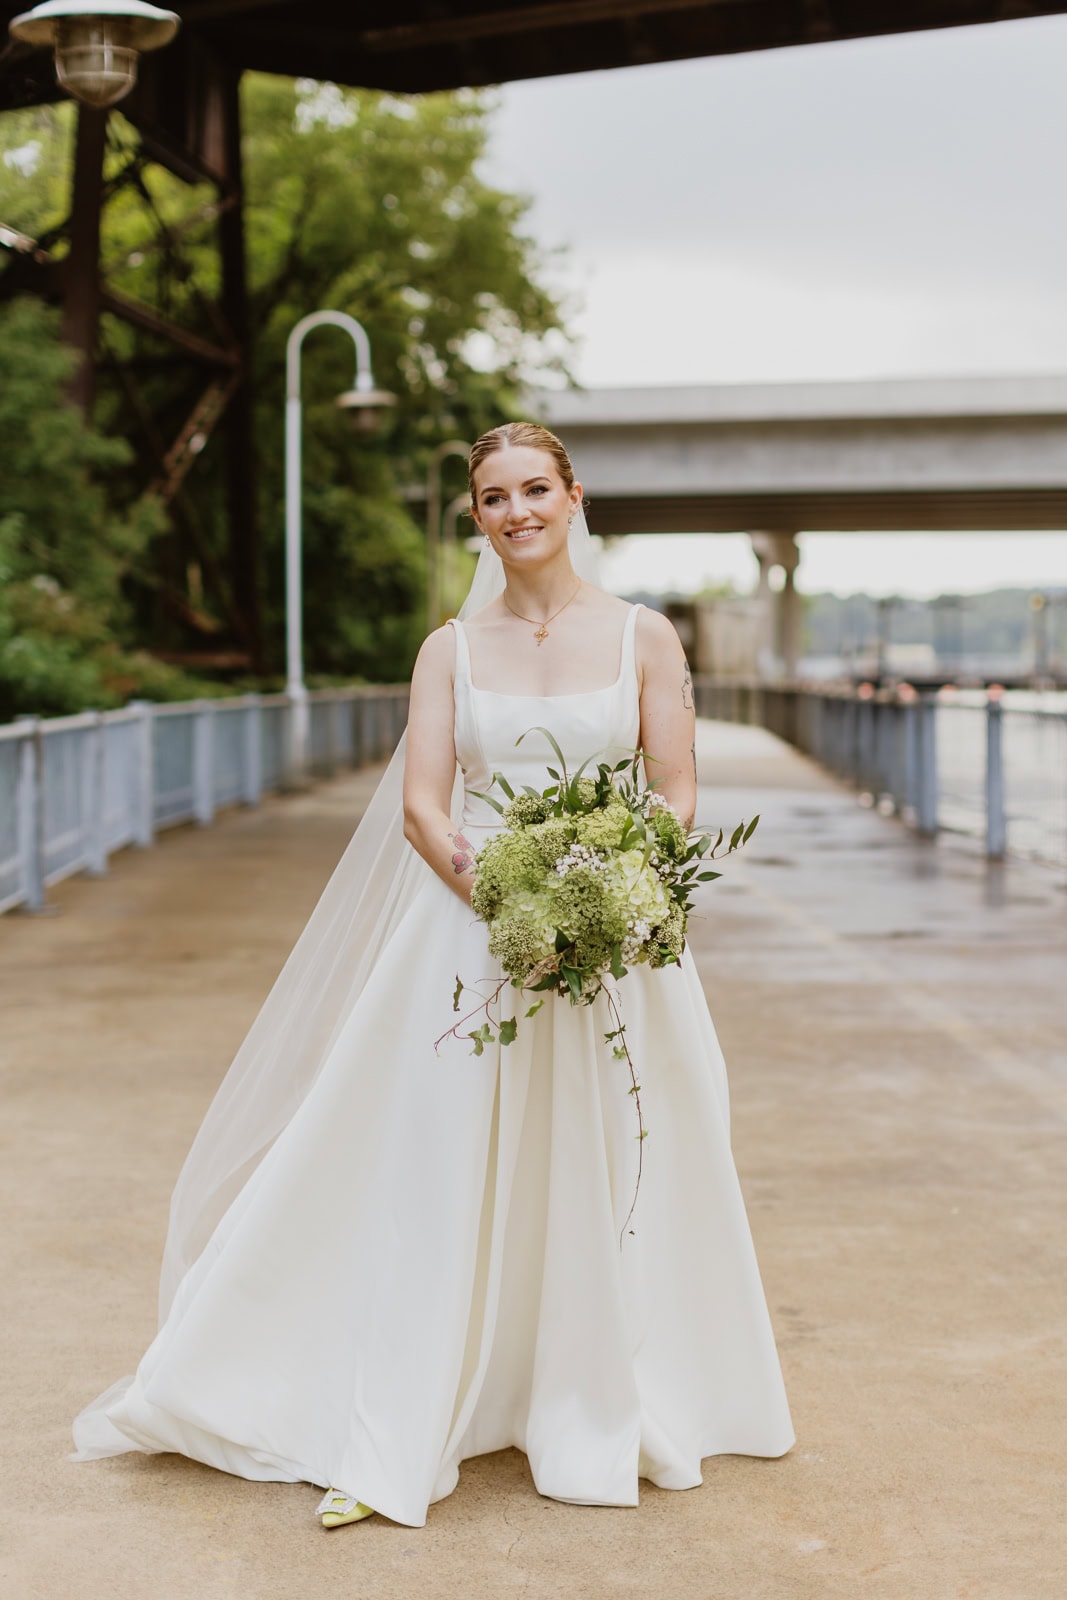 A bride in a white Jenny Yoo wedding dress smiling, holding a large green bouquet, on a path under a bridge.